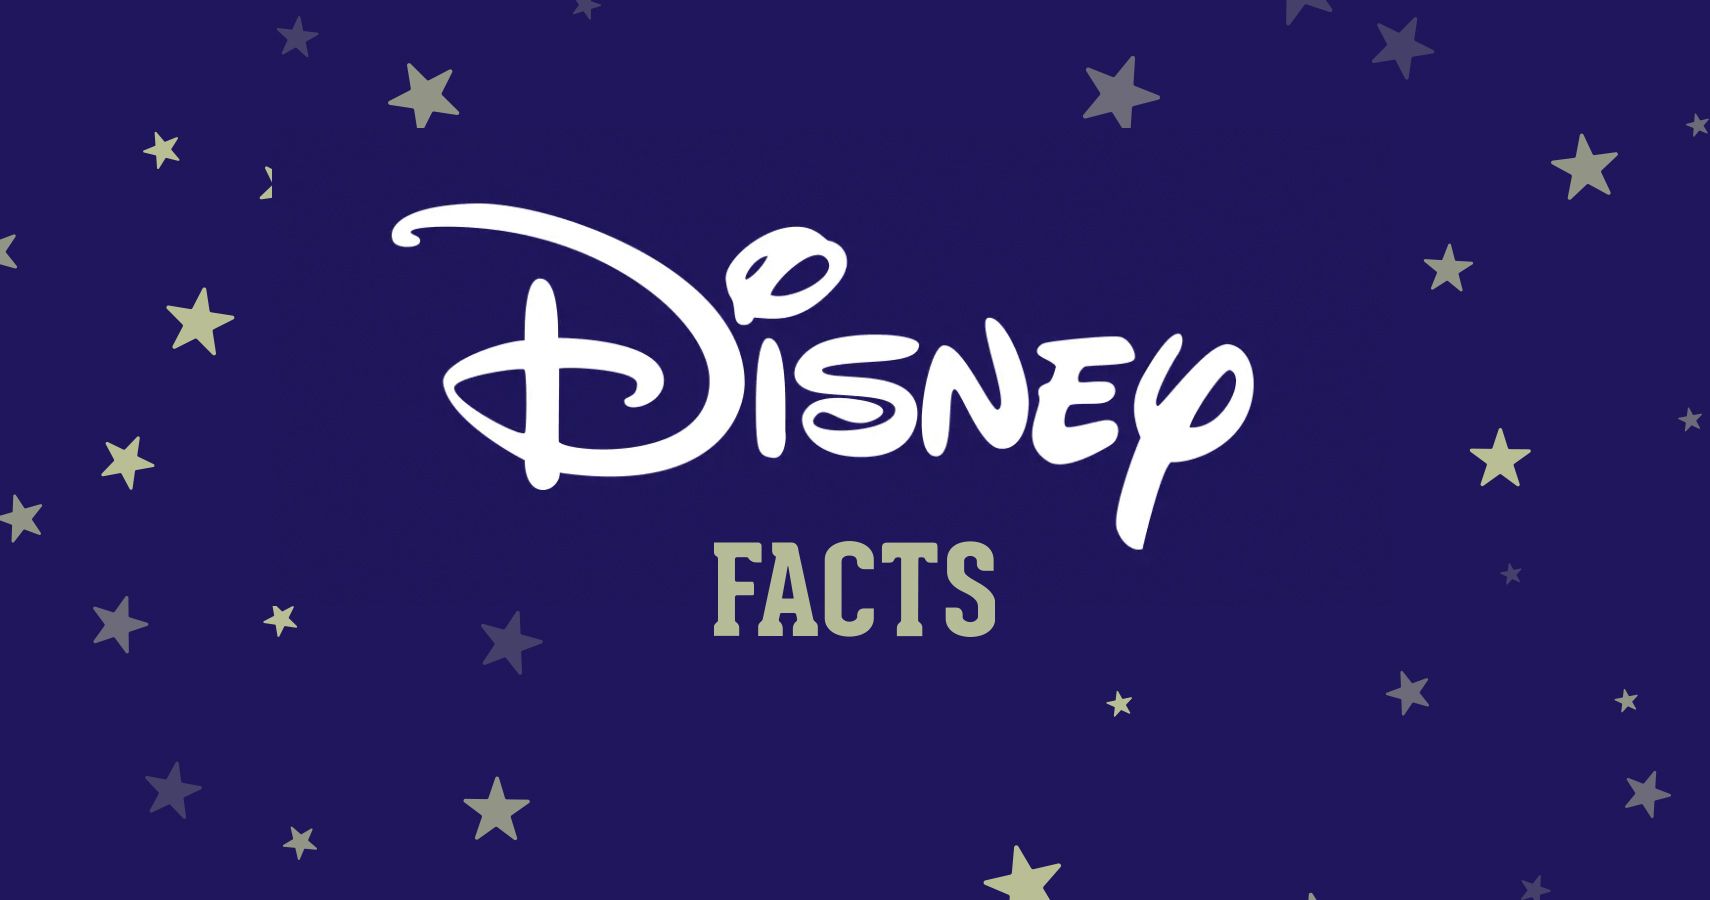 Interesting Disney Facts About Your Kids’ Favorite Movies